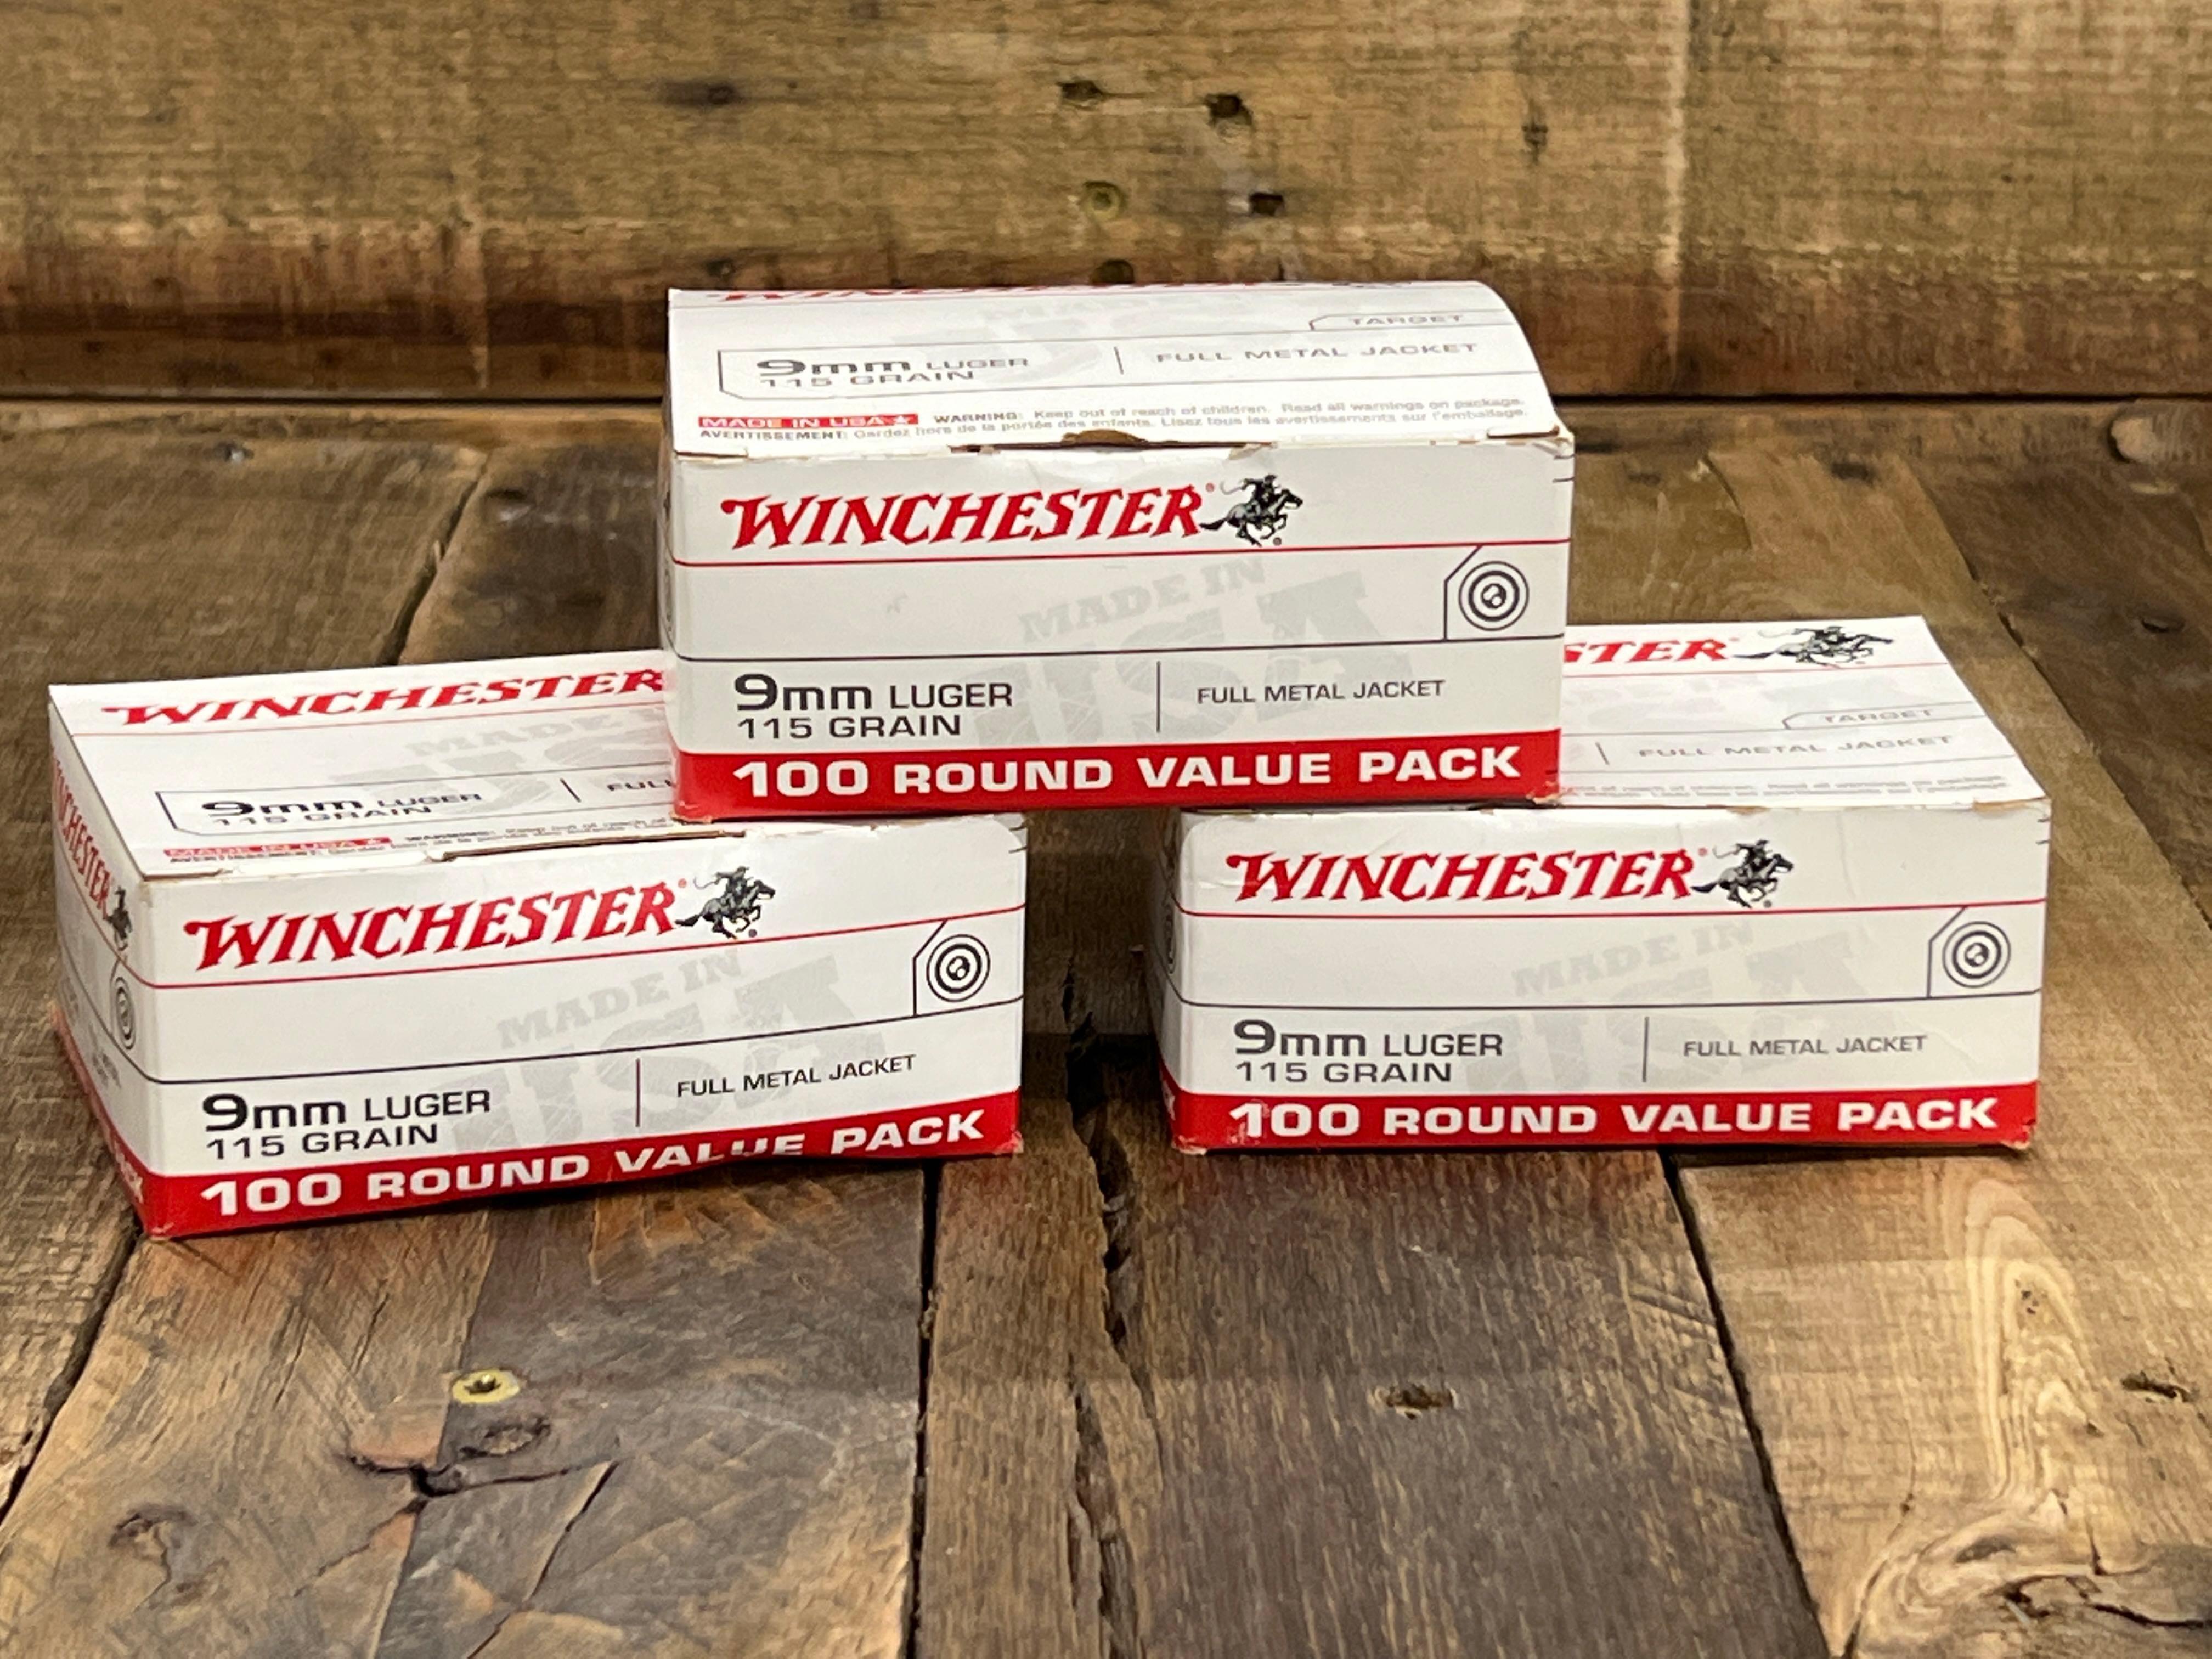 3 BOXES OF WINCHESTER 9MM LUGER 115GR FMJ TARGET AMMO